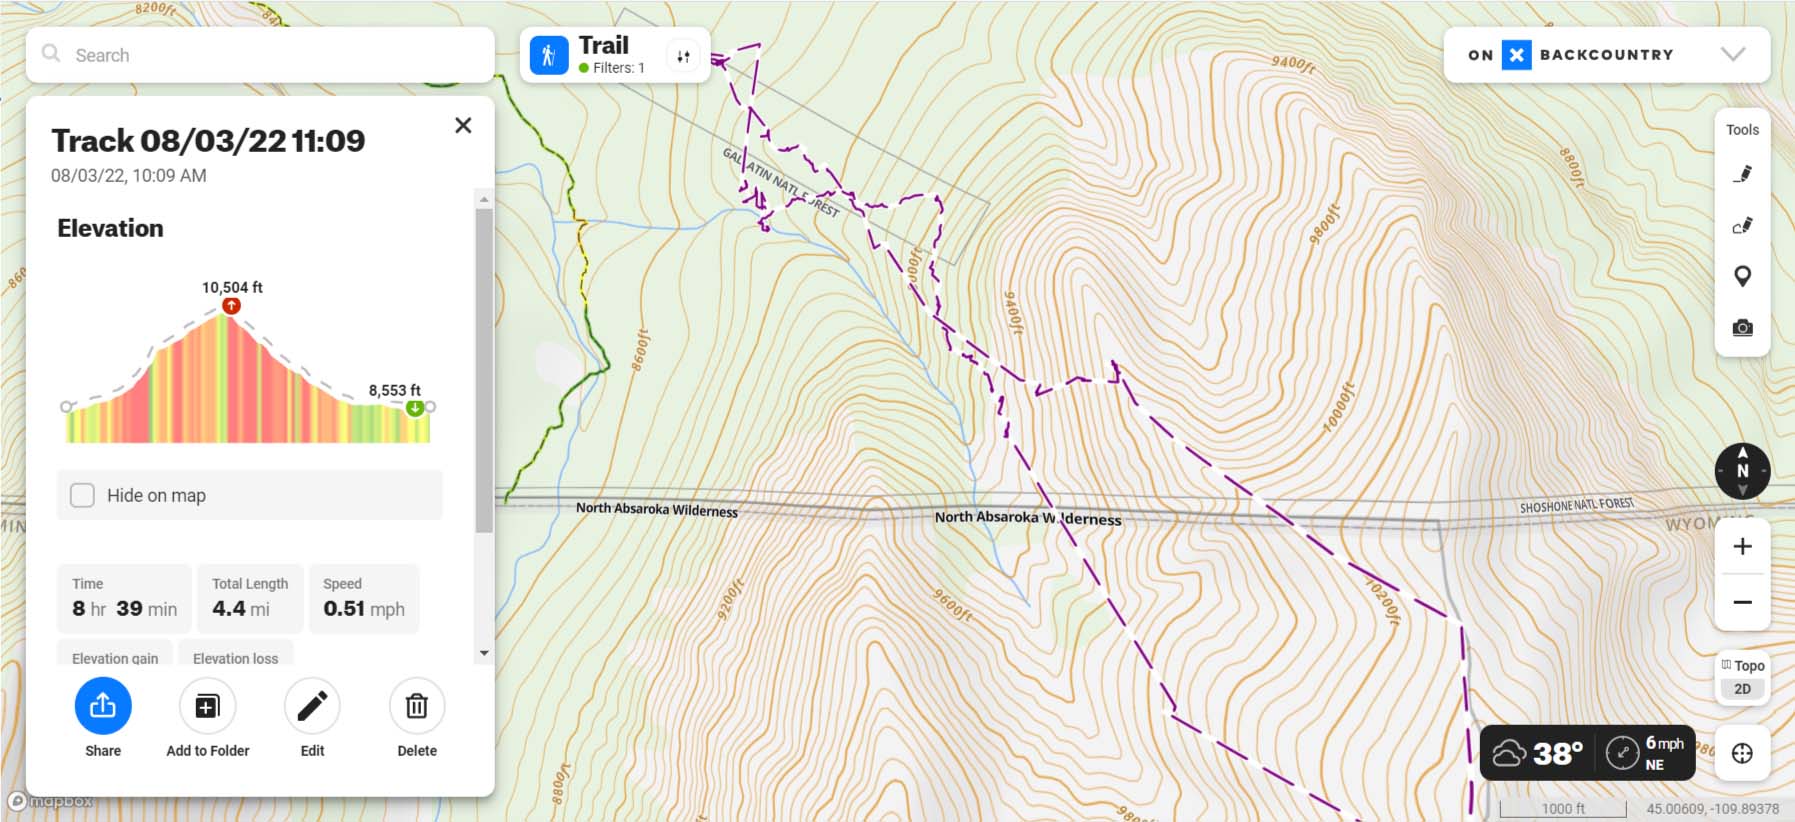 Some of the lines in this GPS track are oddly straight.